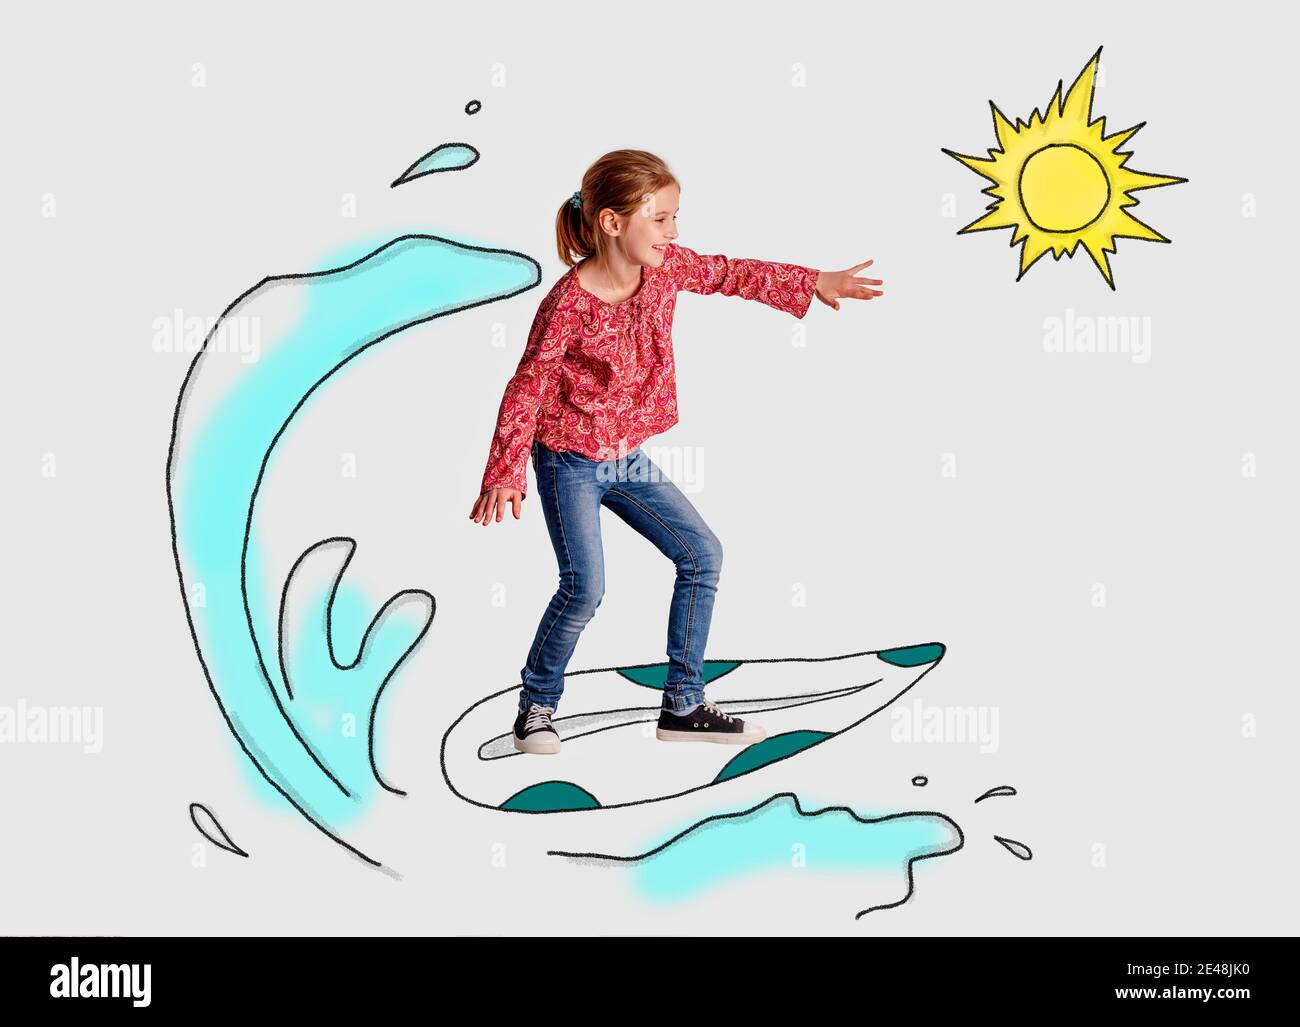 Little girl surfing on colored sketch Stock Photo